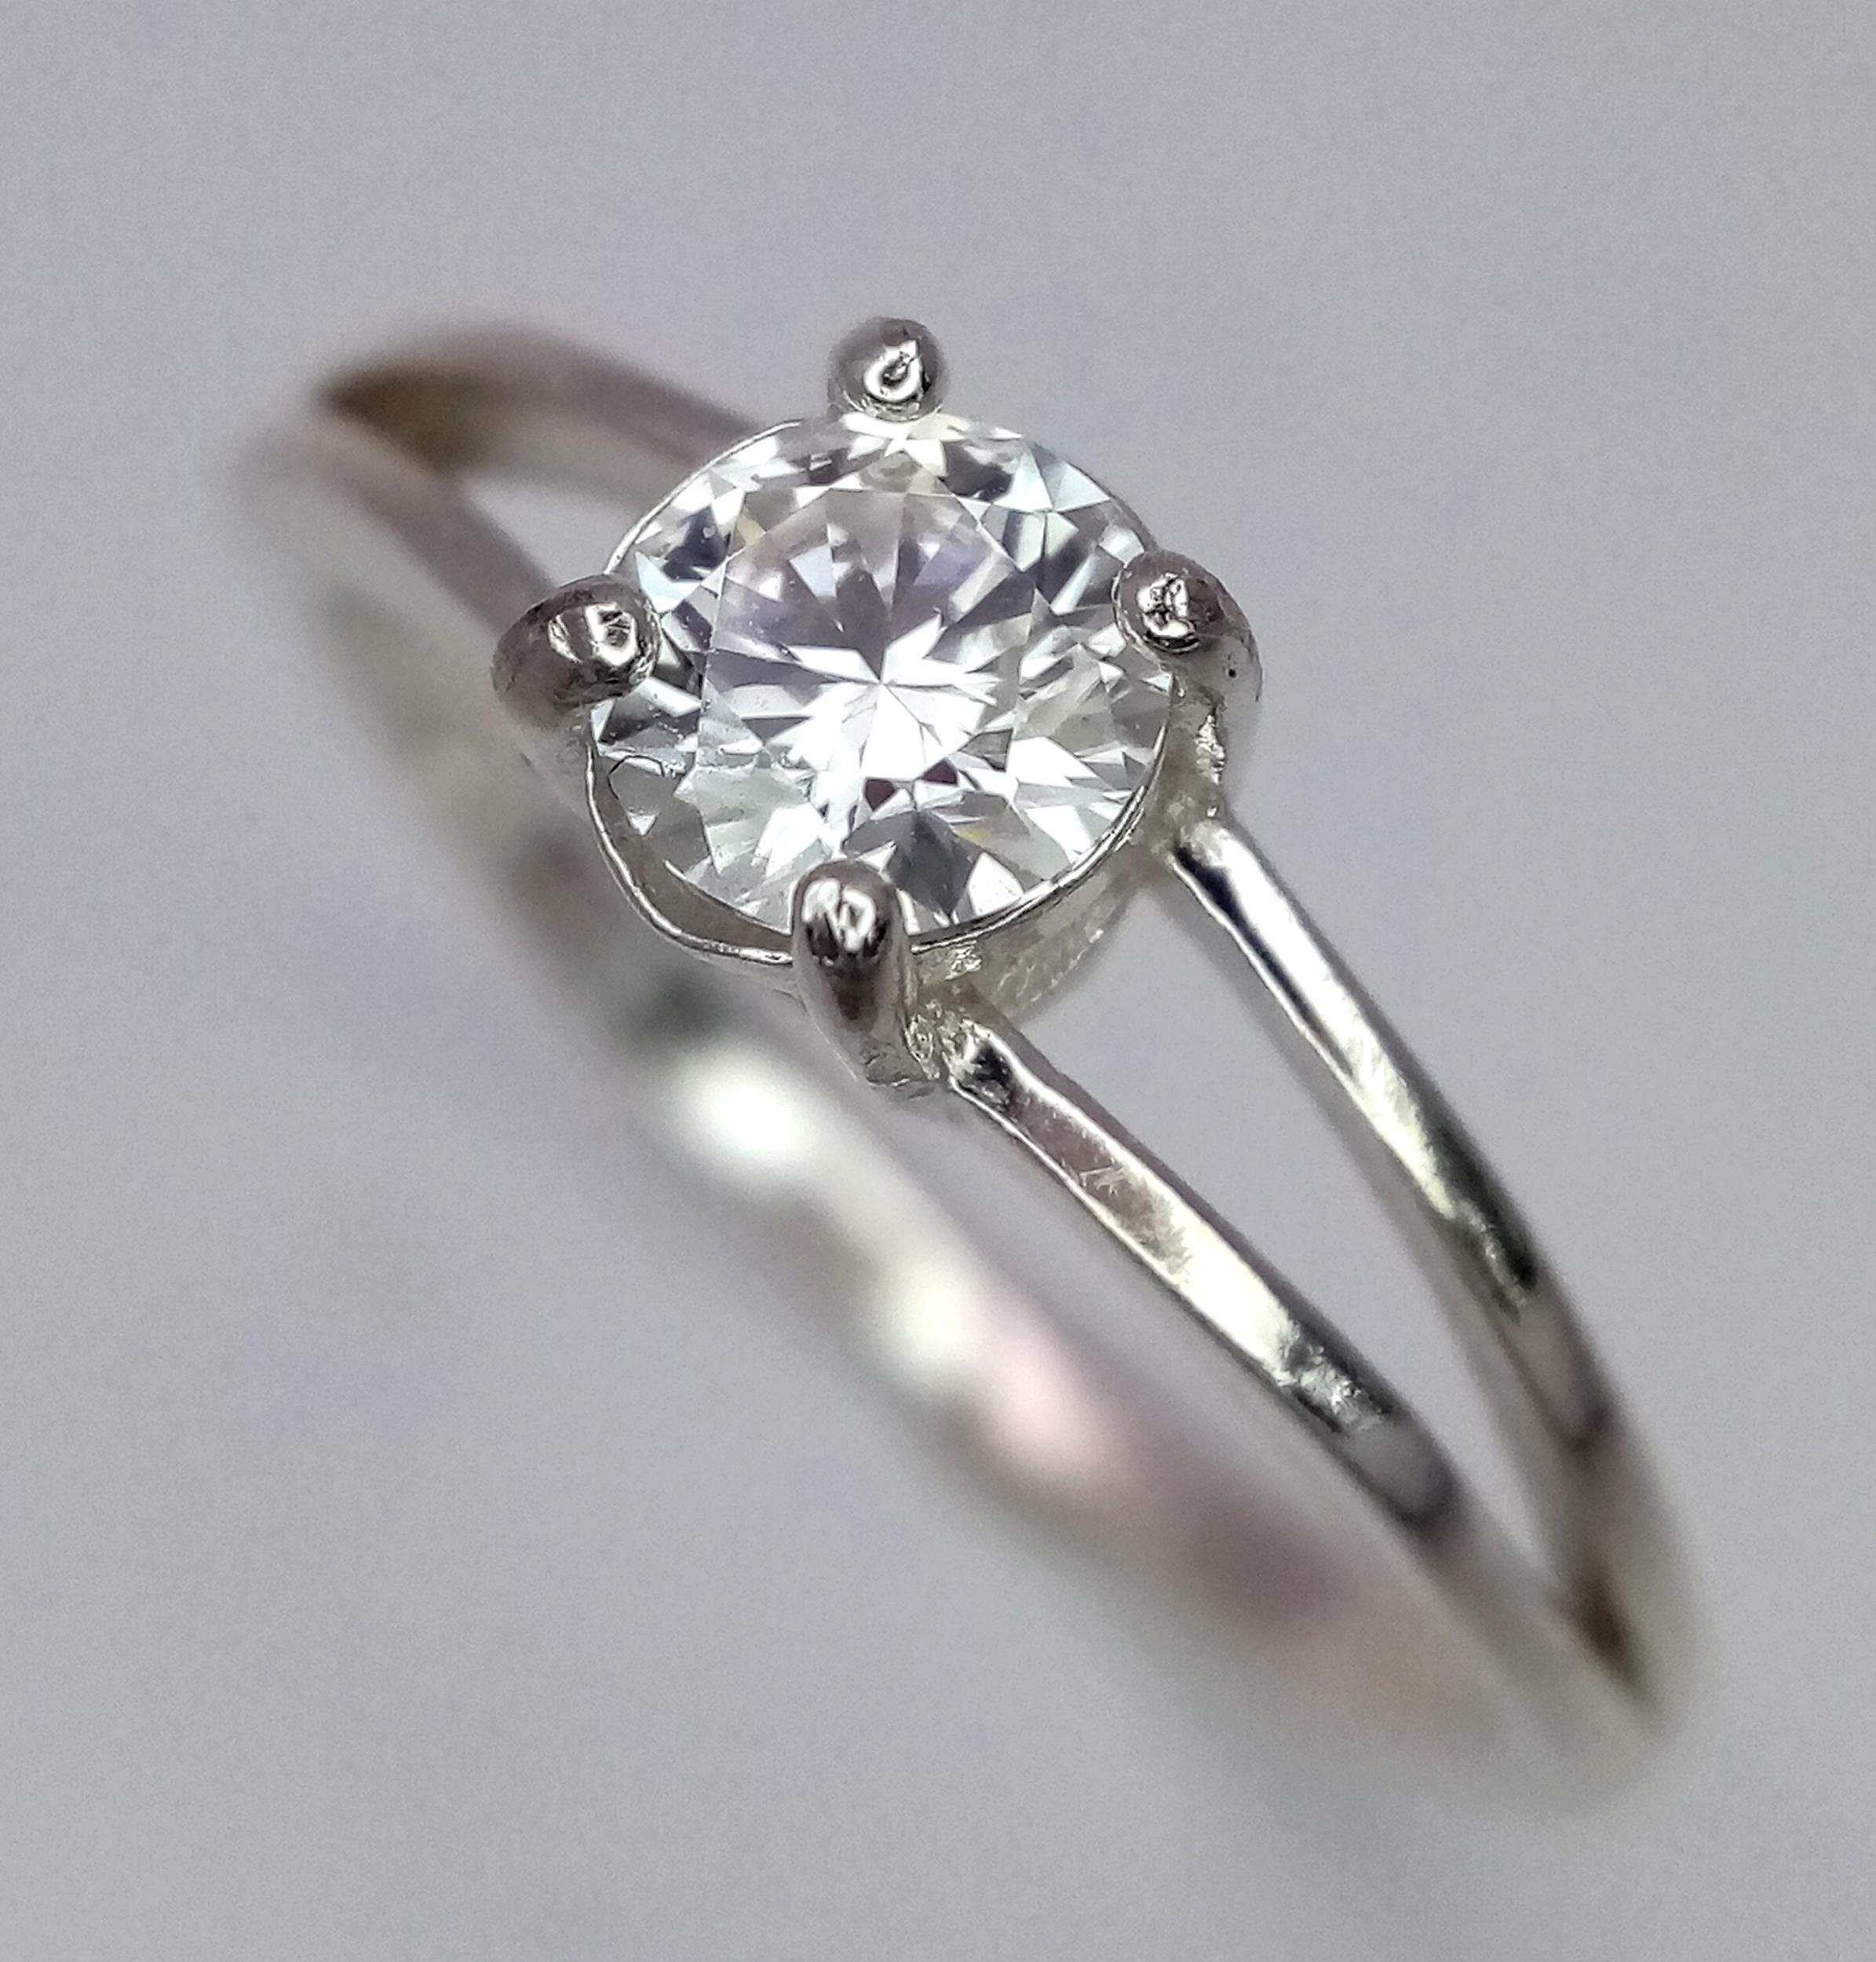 A 0.5ct Moissanite Solitaire Ring. Set in 925 silver. Comes with a GRA certificate. Size M. - Image 3 of 6